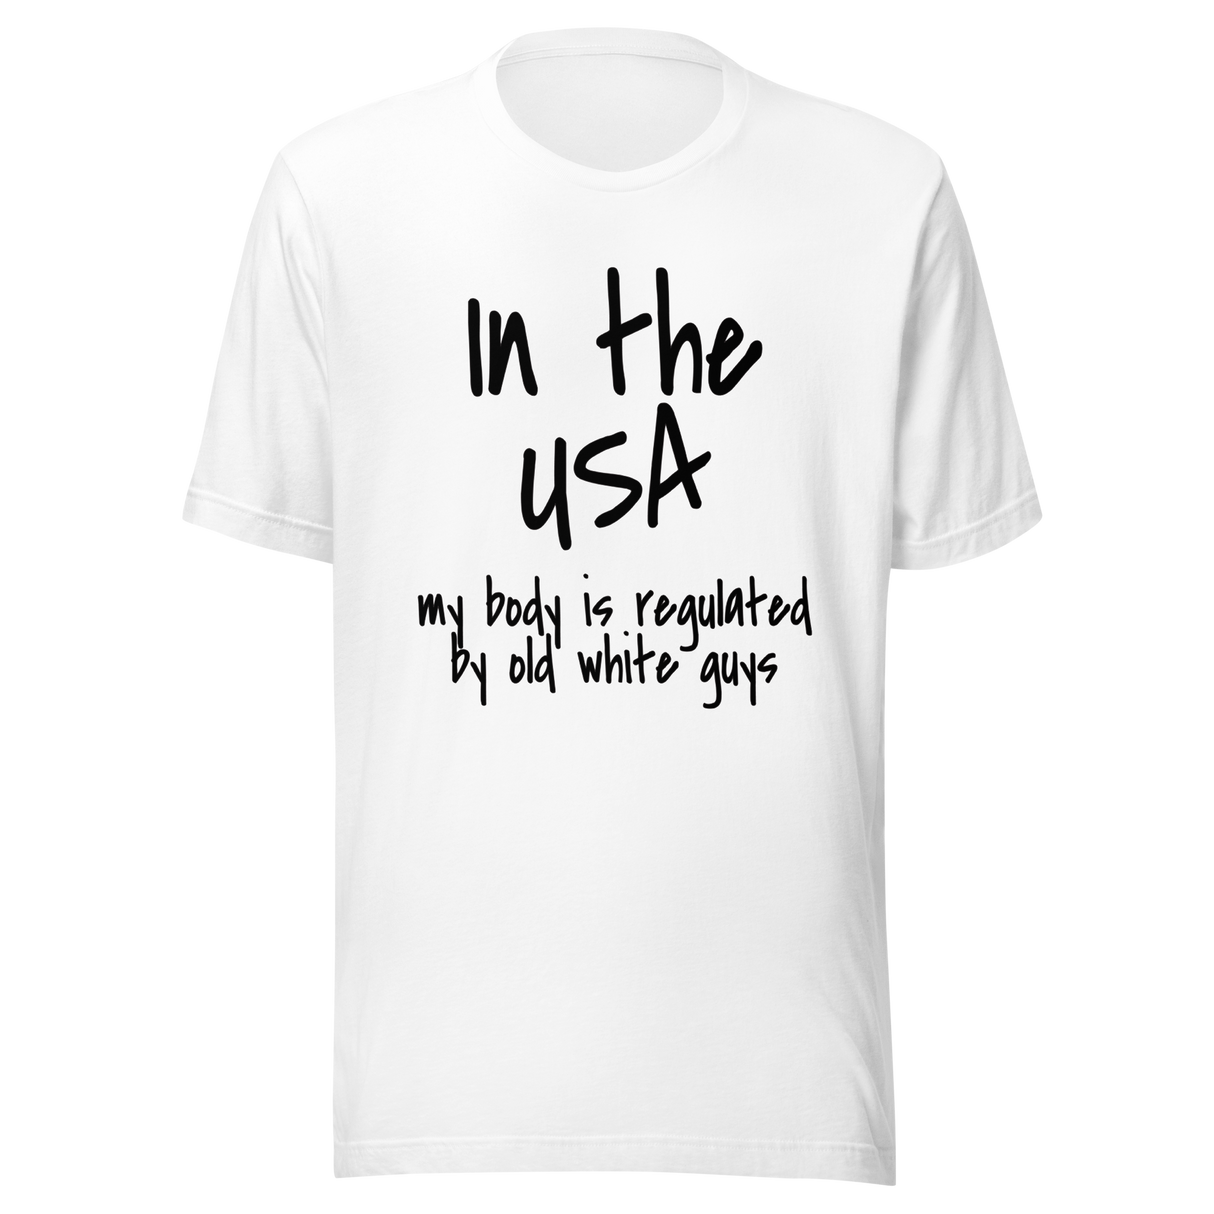 Products In The USA My Body Is Regulated By Old White Guys - USA Tee - Body T-Shirt - Regulated Tee - T-Shirt - Tee#color_white